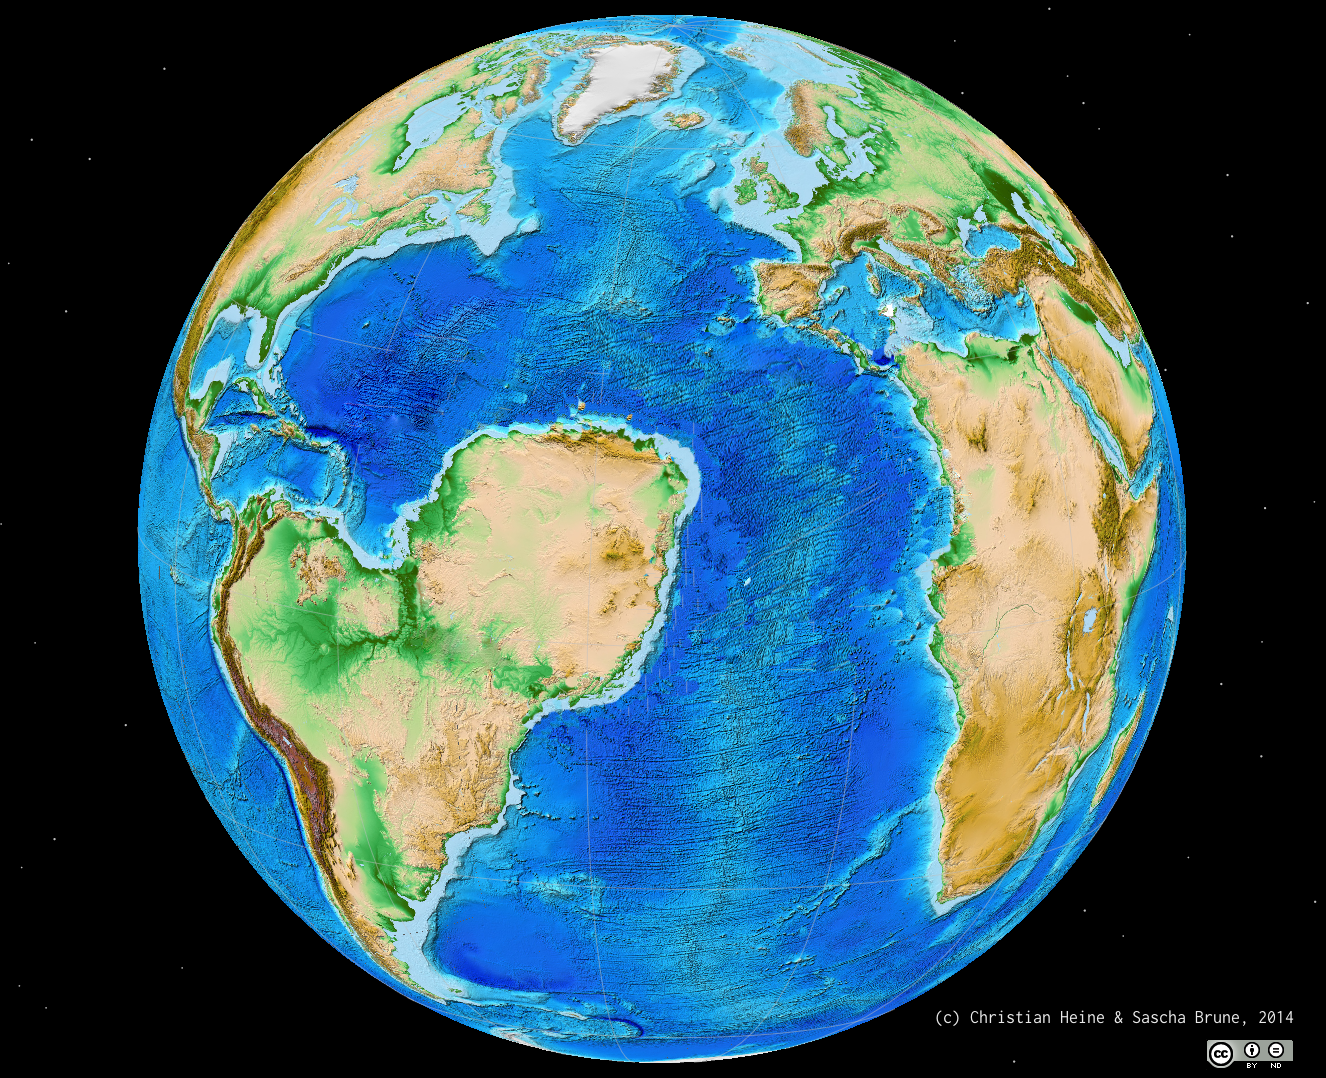 The world as it might have looked like if the West African Rift system had been "successful" in forming a "Saharan Atlantic Ocean basin". We explain in our paper why this did not happen. Made with GPlates and image manipulation.